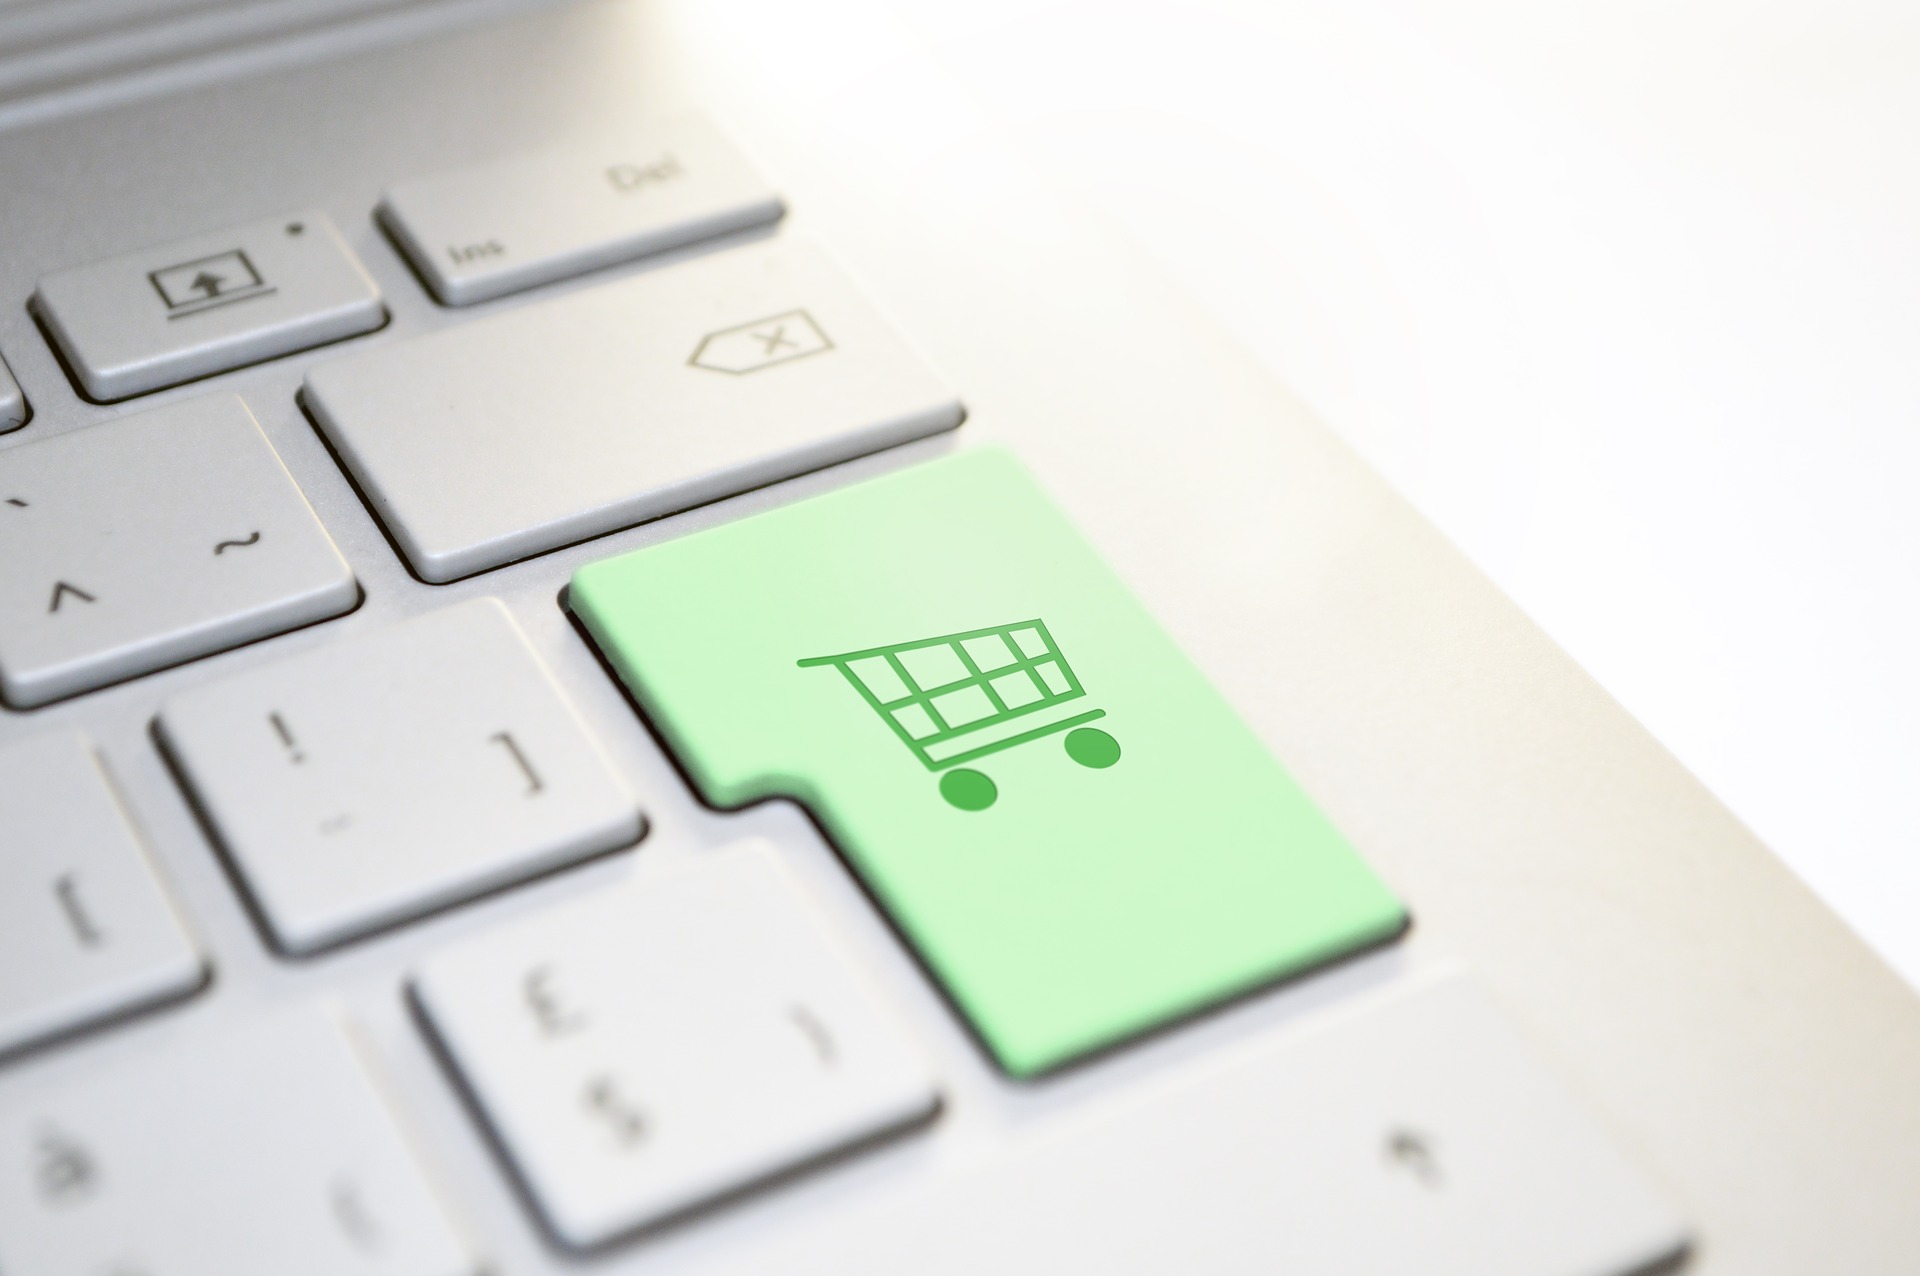 Cyber Monday 2021: When is it and what deals you need to look out